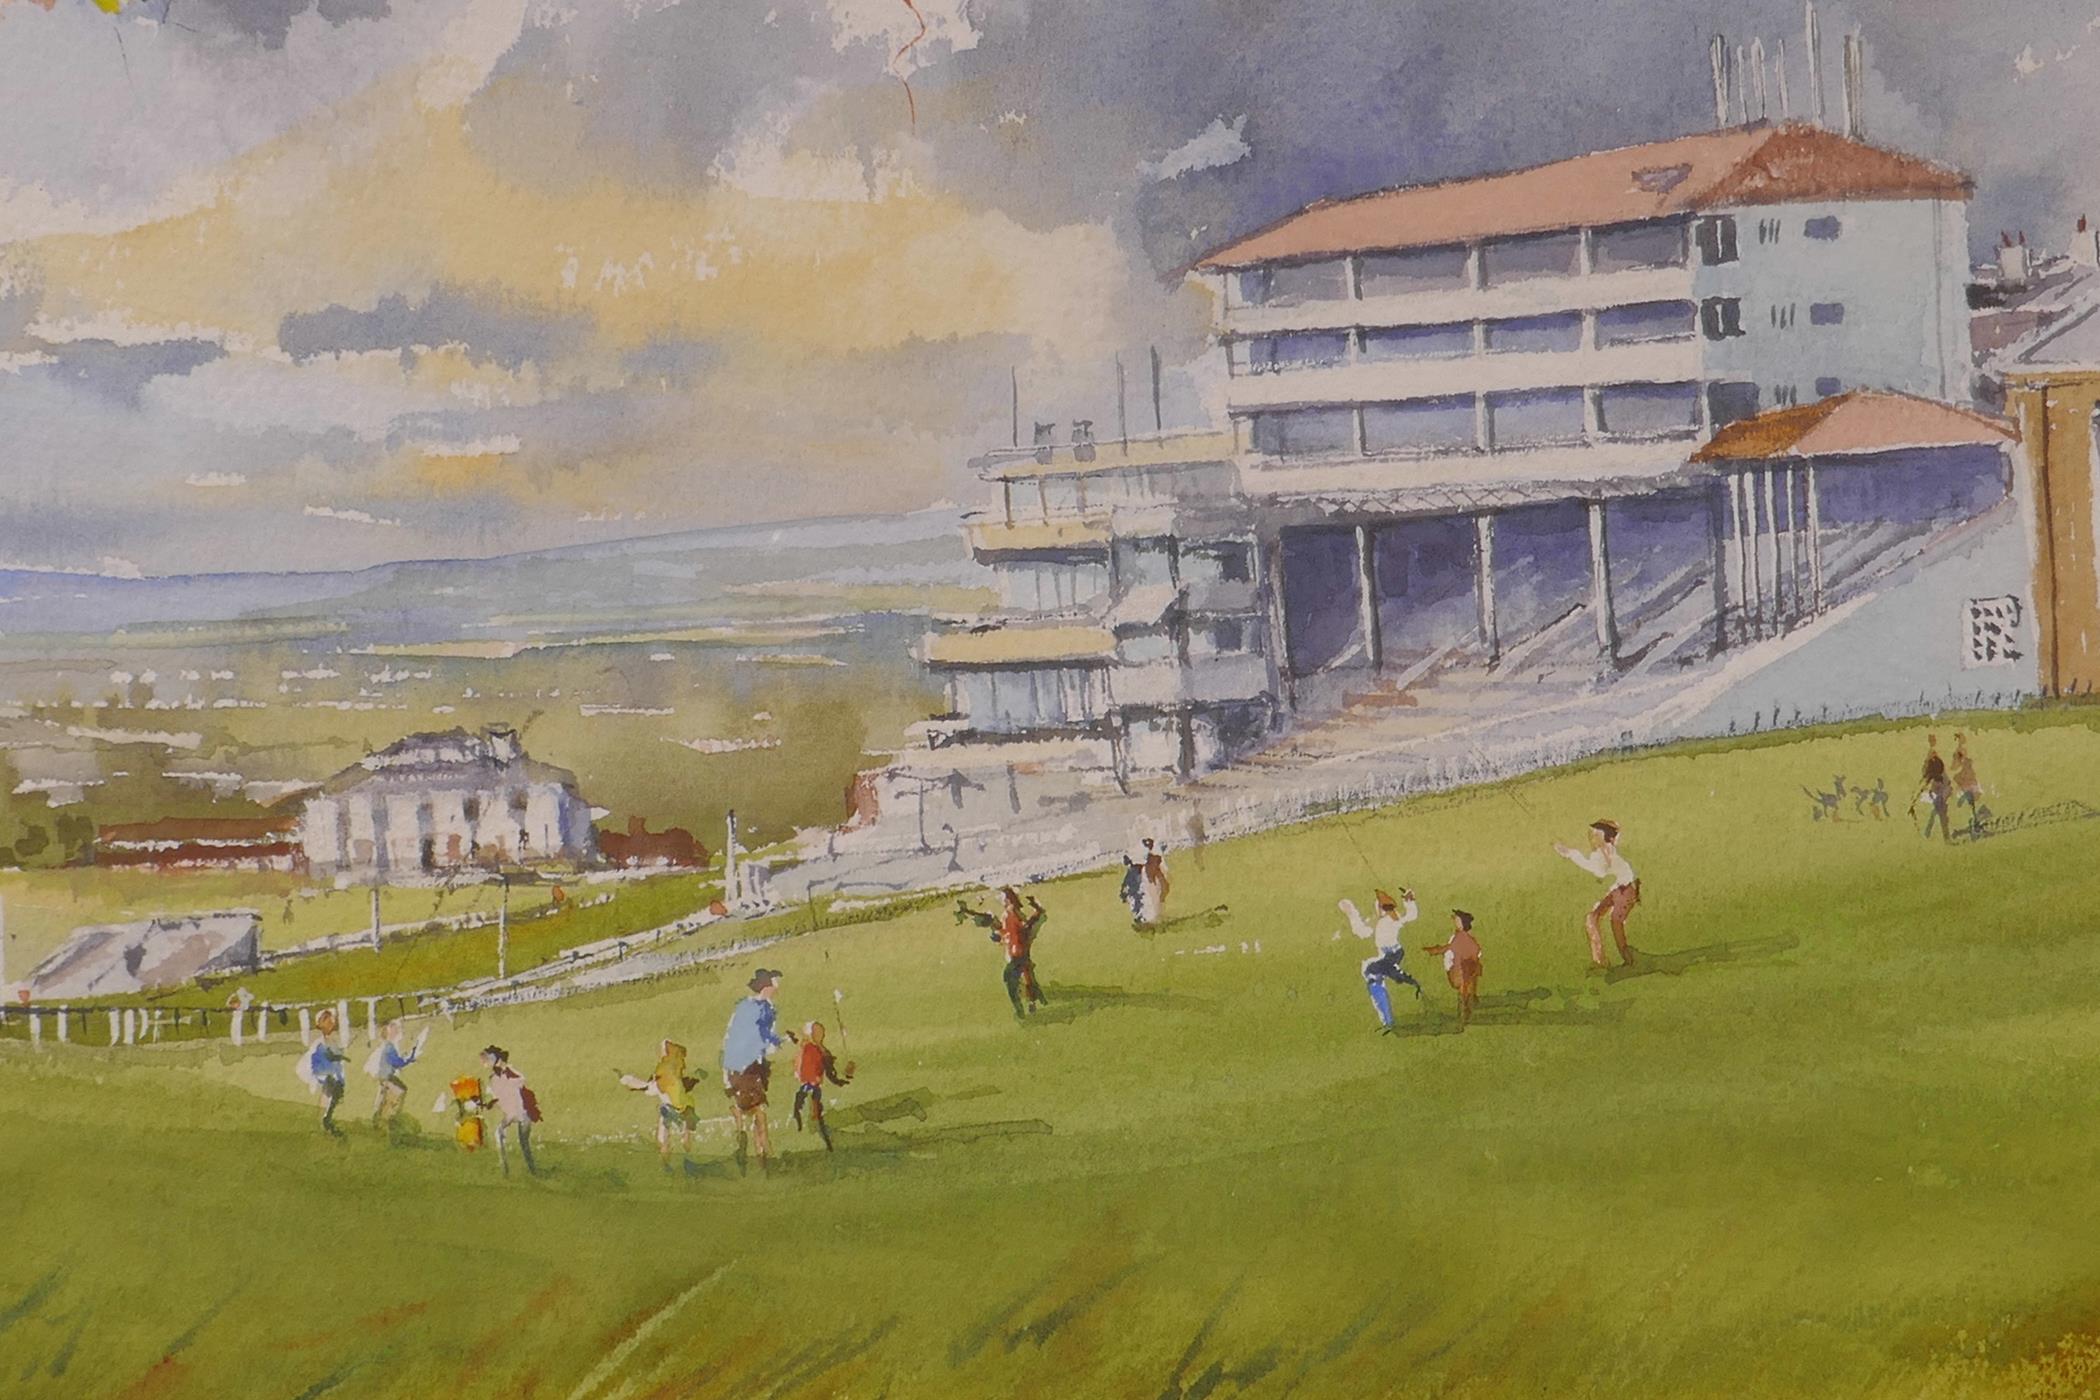 Douglas Baldwin, Flying Kites on Epsom Downs, signed and dated '94, watercolour, 20" x 13" - Image 2 of 3